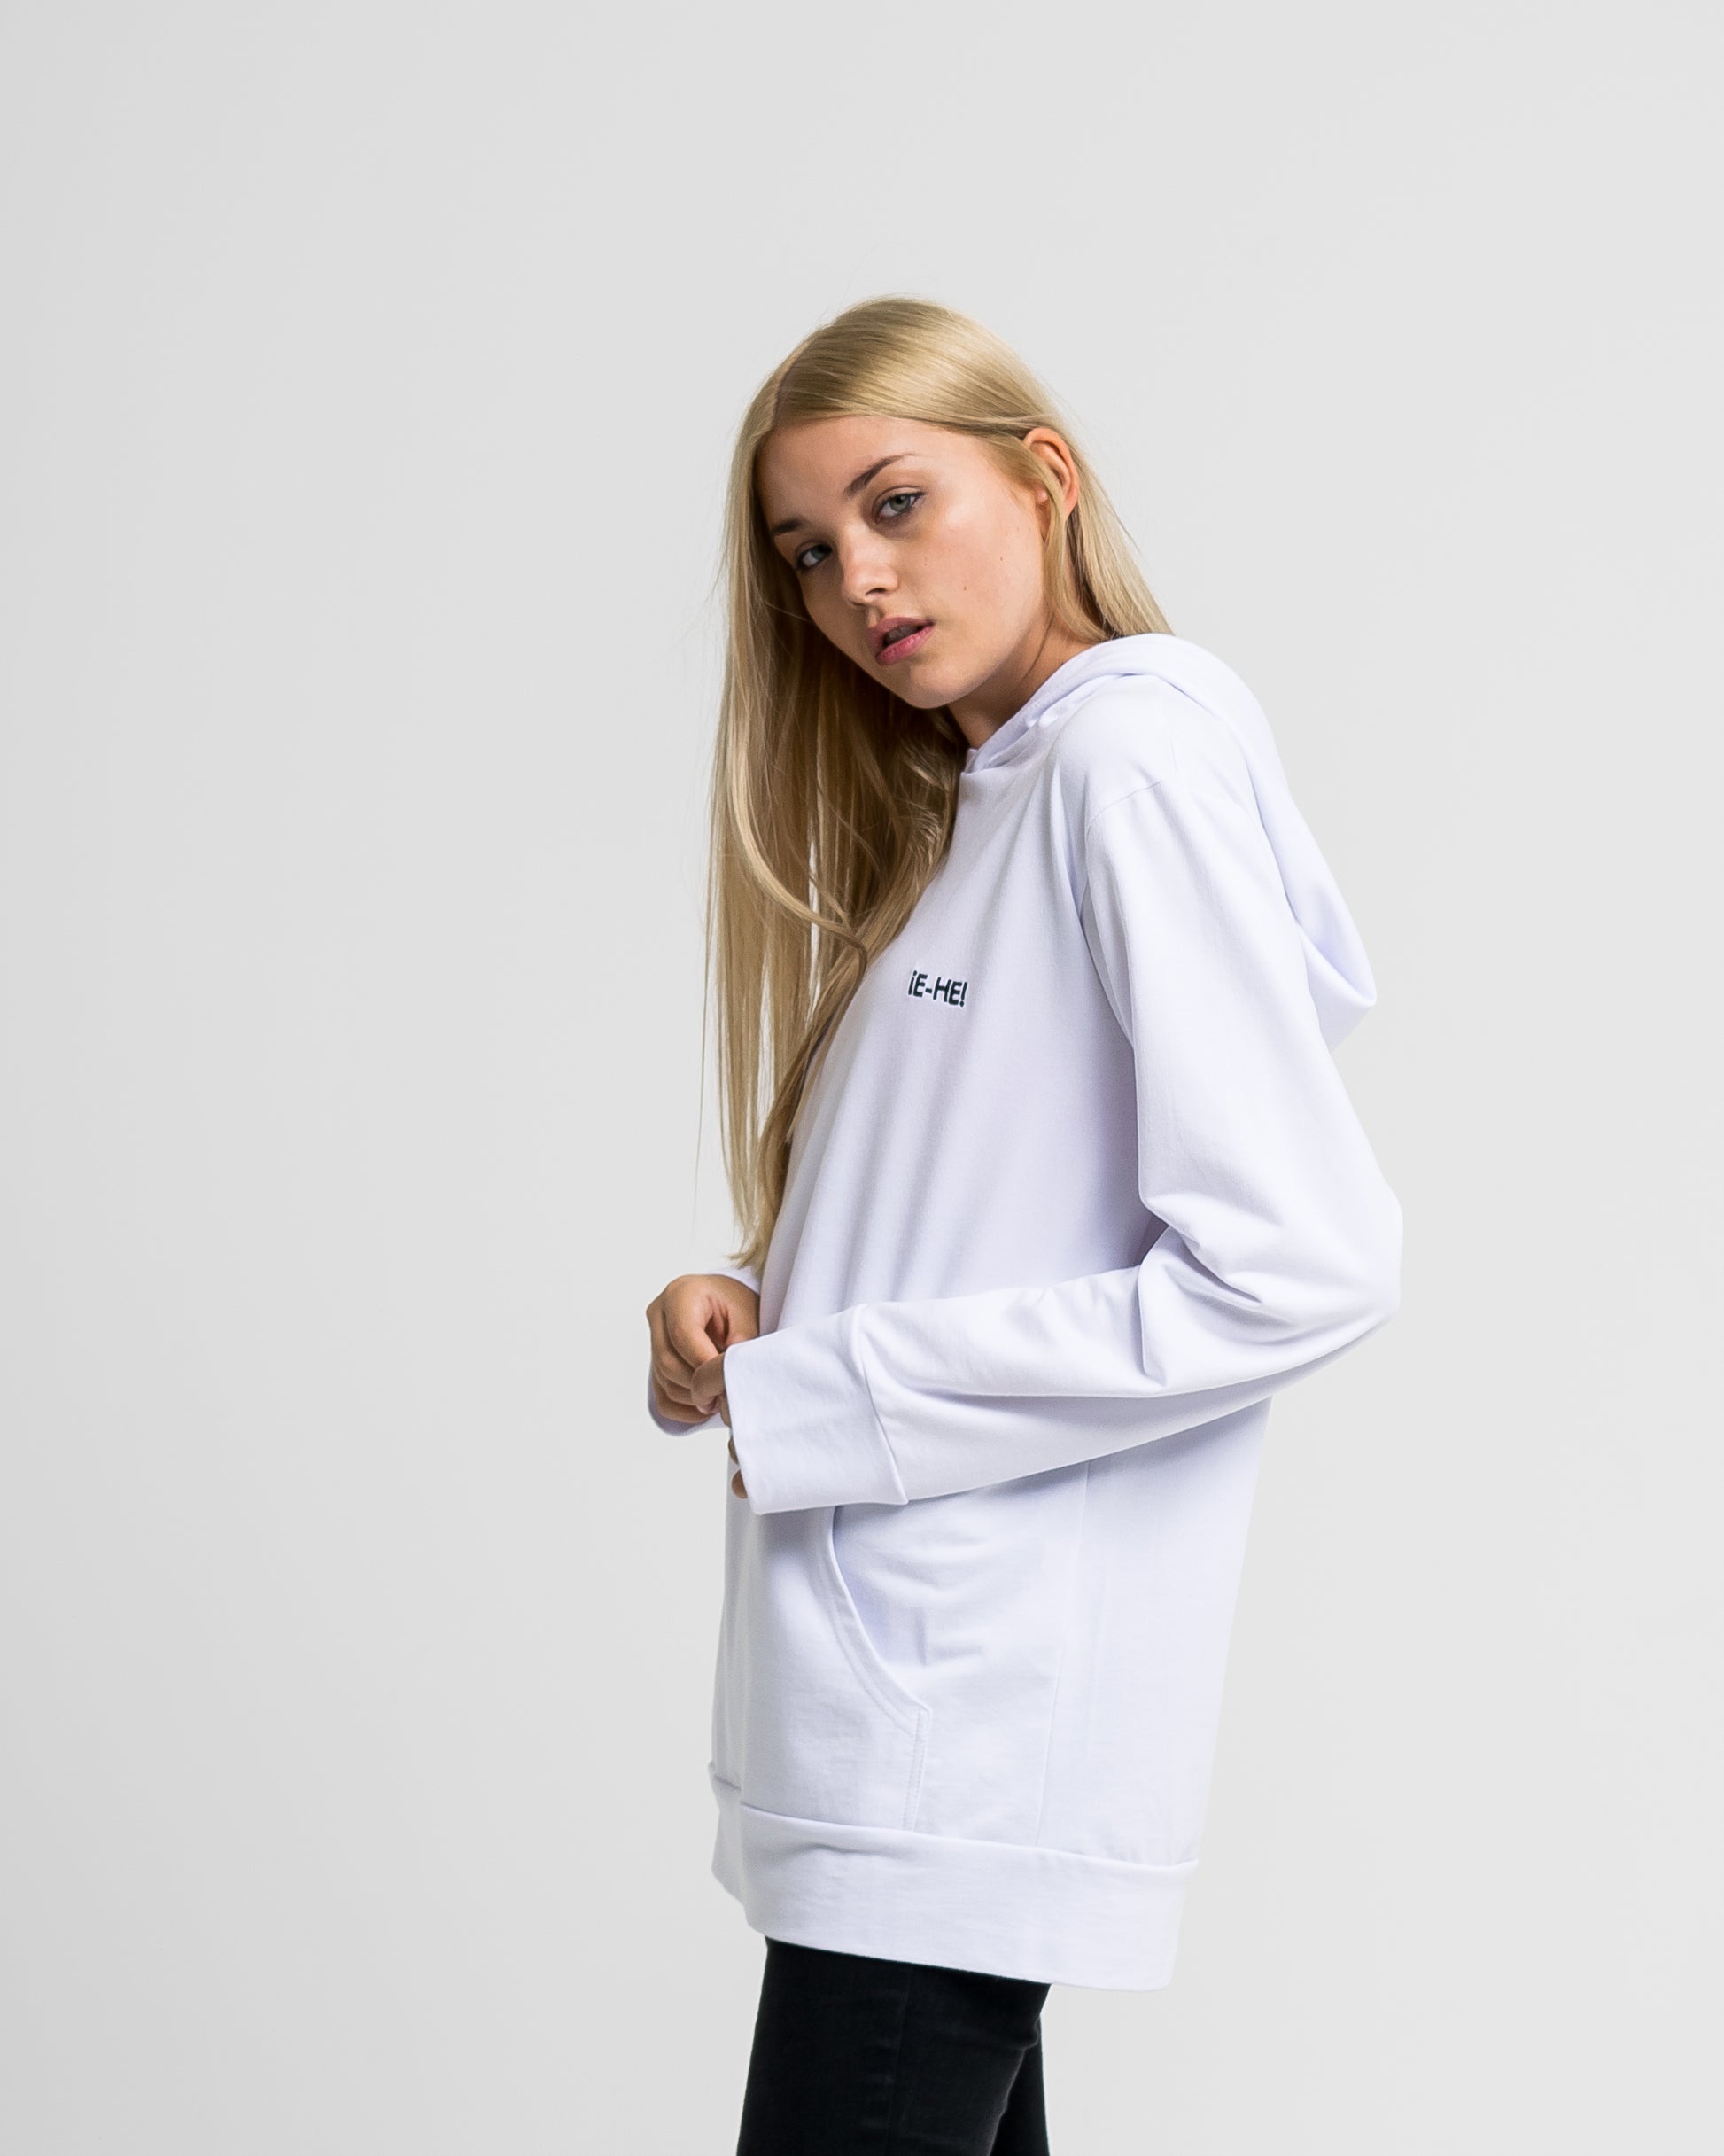 EHE Apparel white unisex hoodie with black embroidered logo